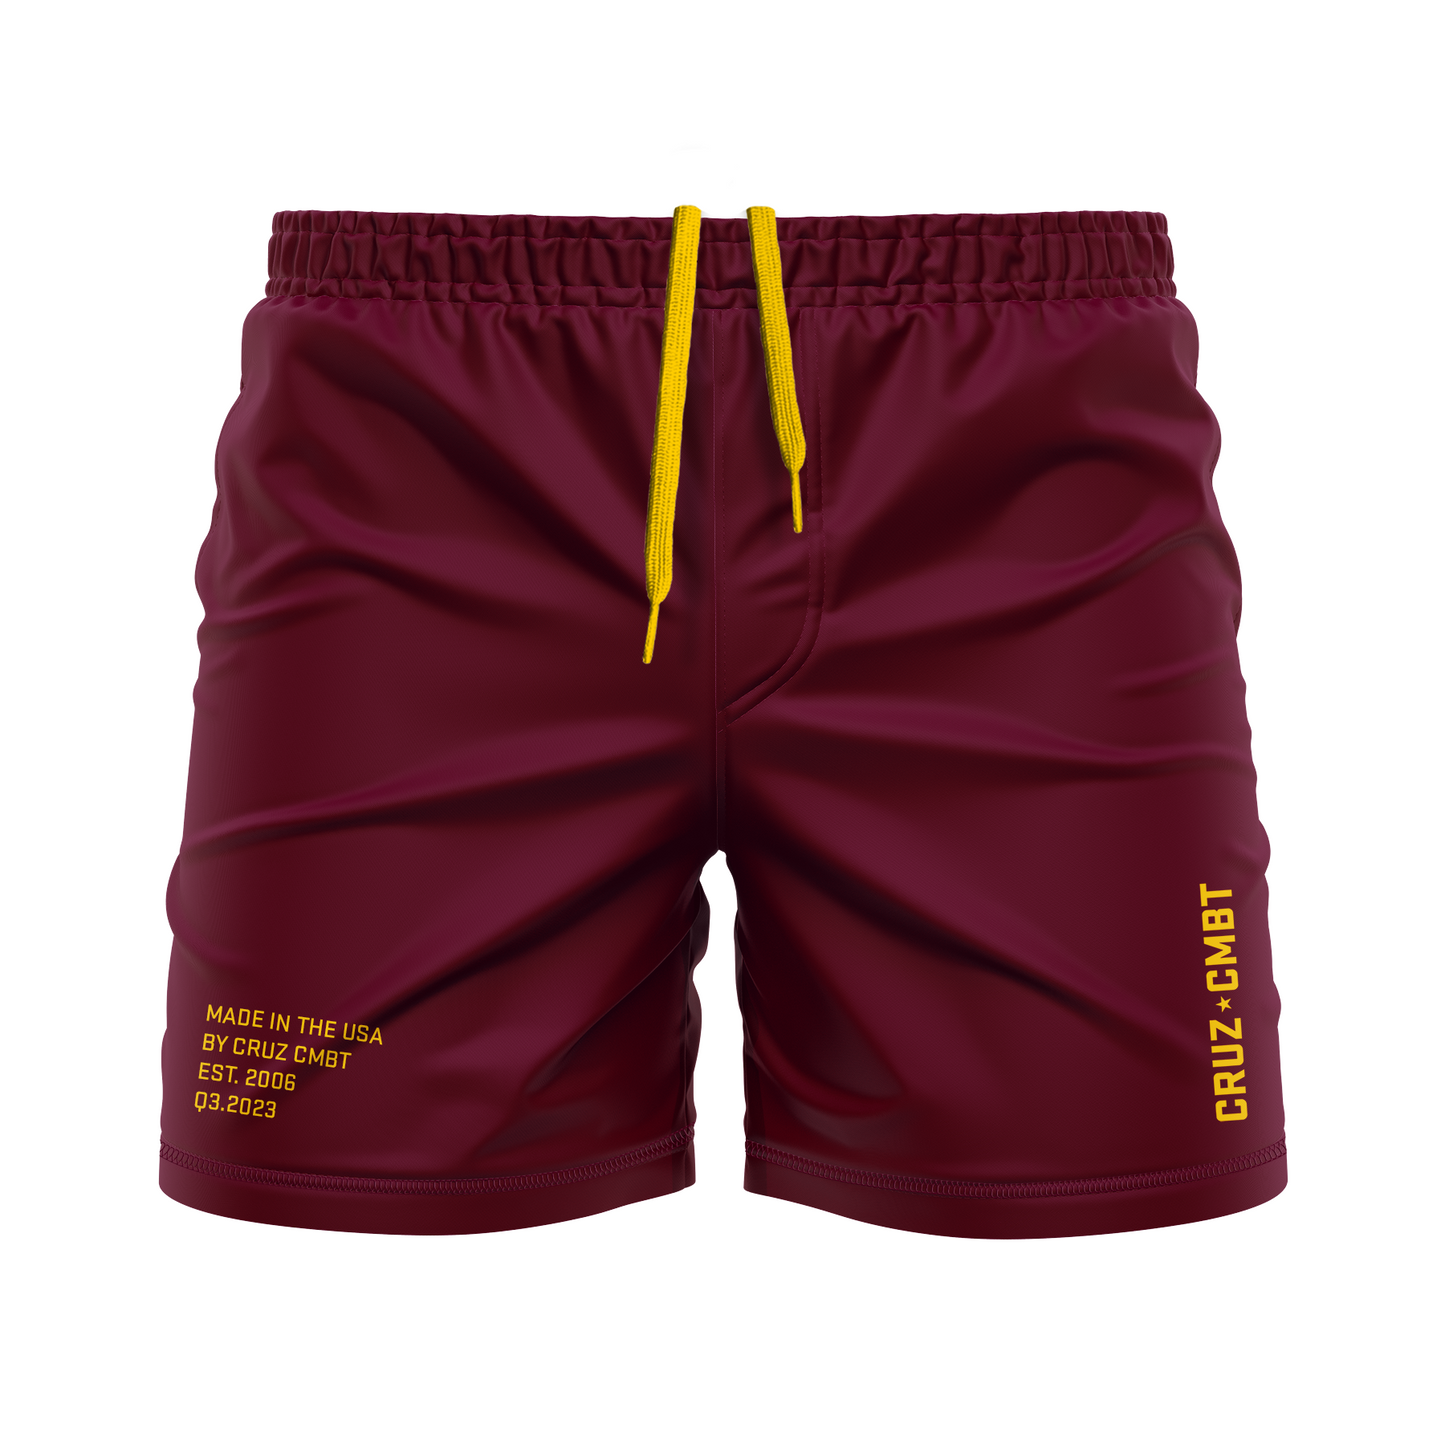 Base Collection men's FC shorts, maroon and athl. gold